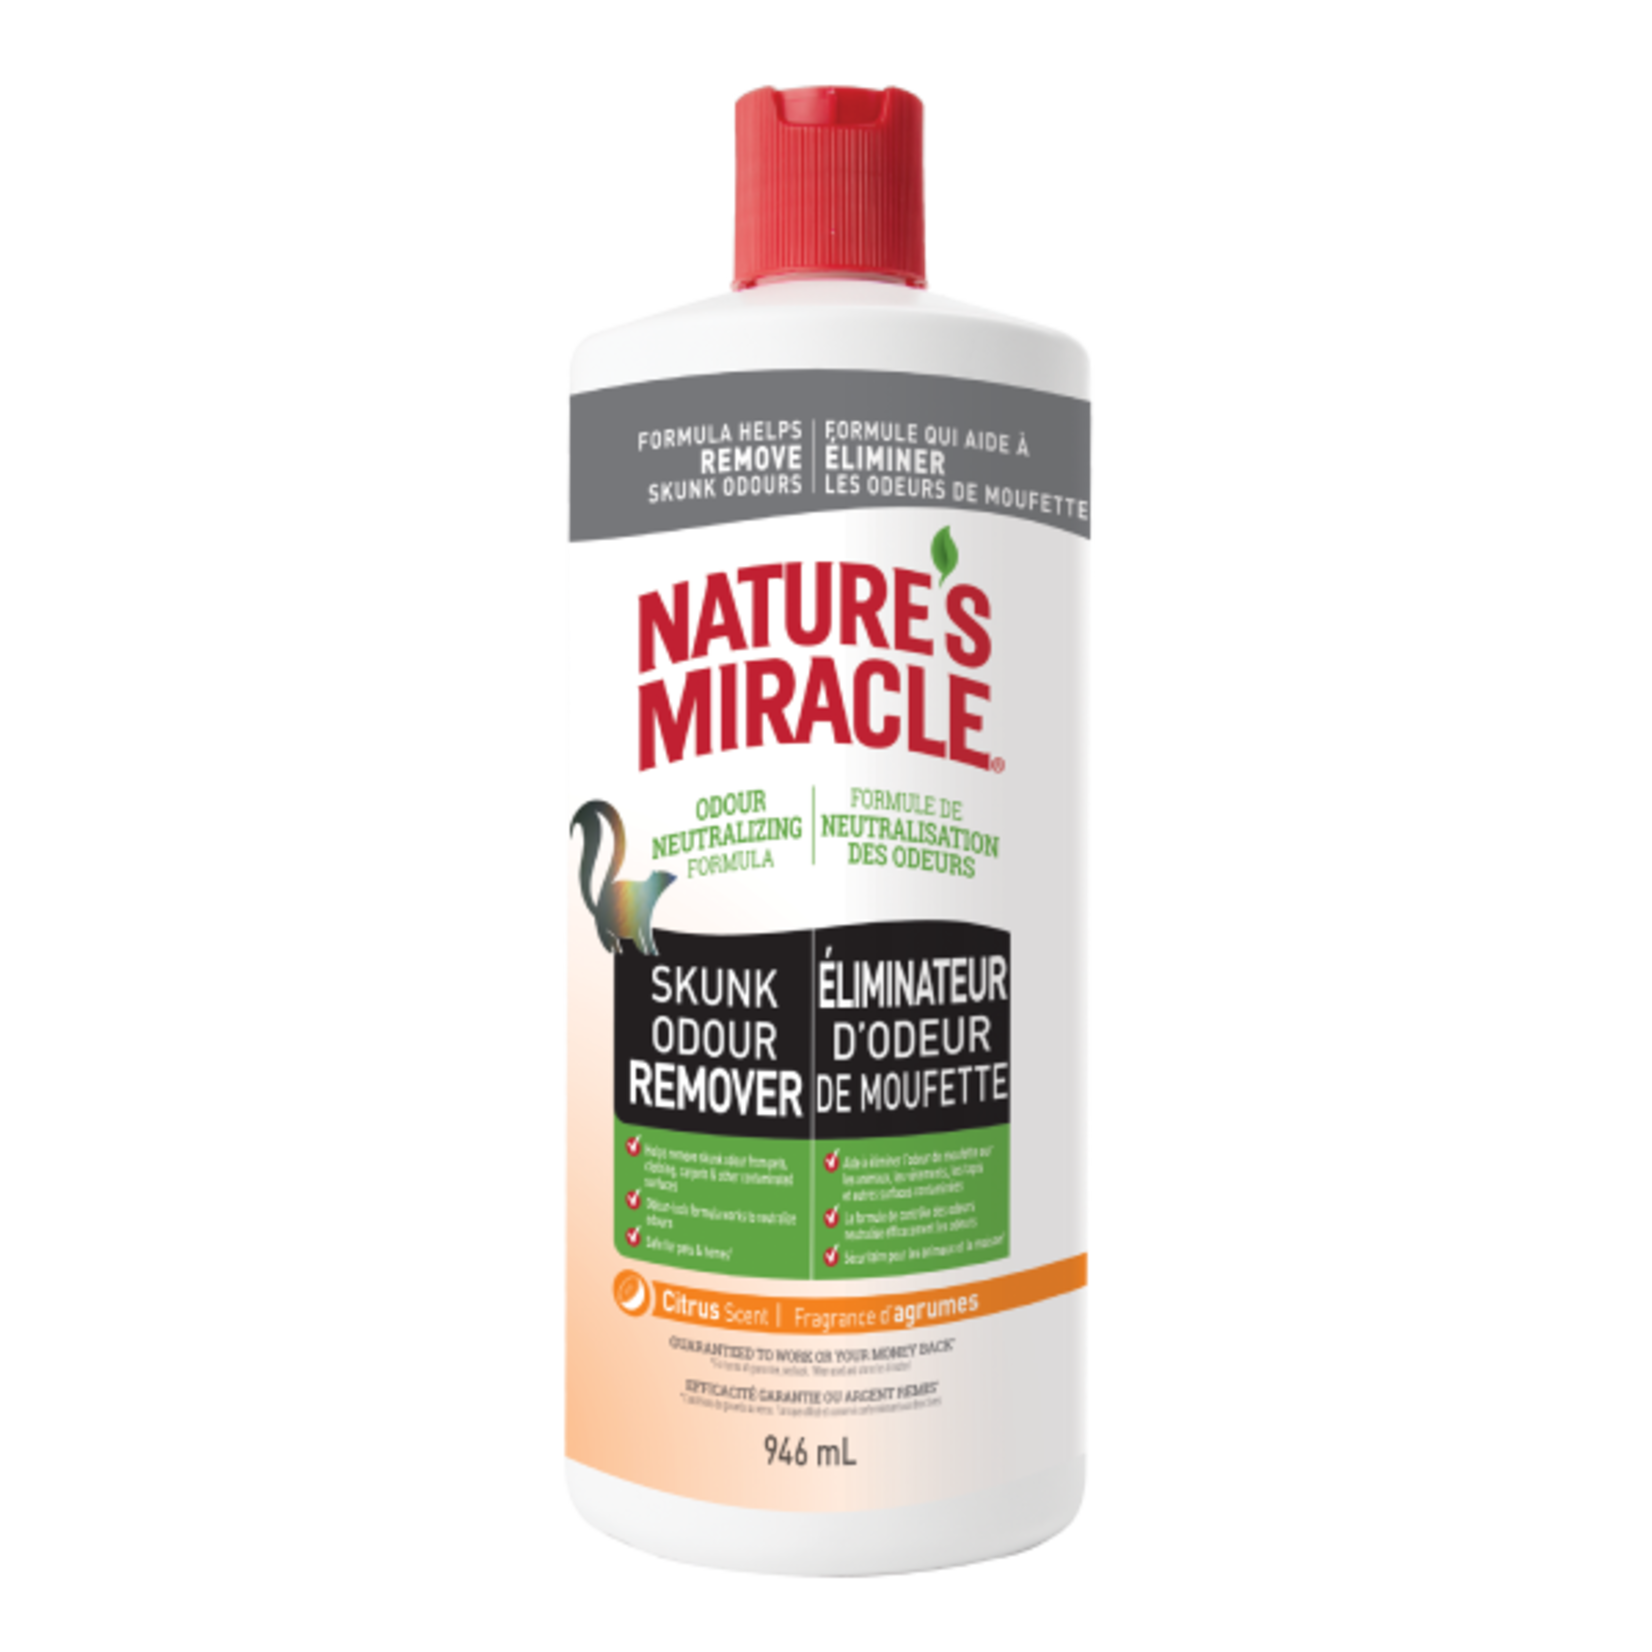 Nature's Miracle Skunk Odor Remover- Nature's Miracle